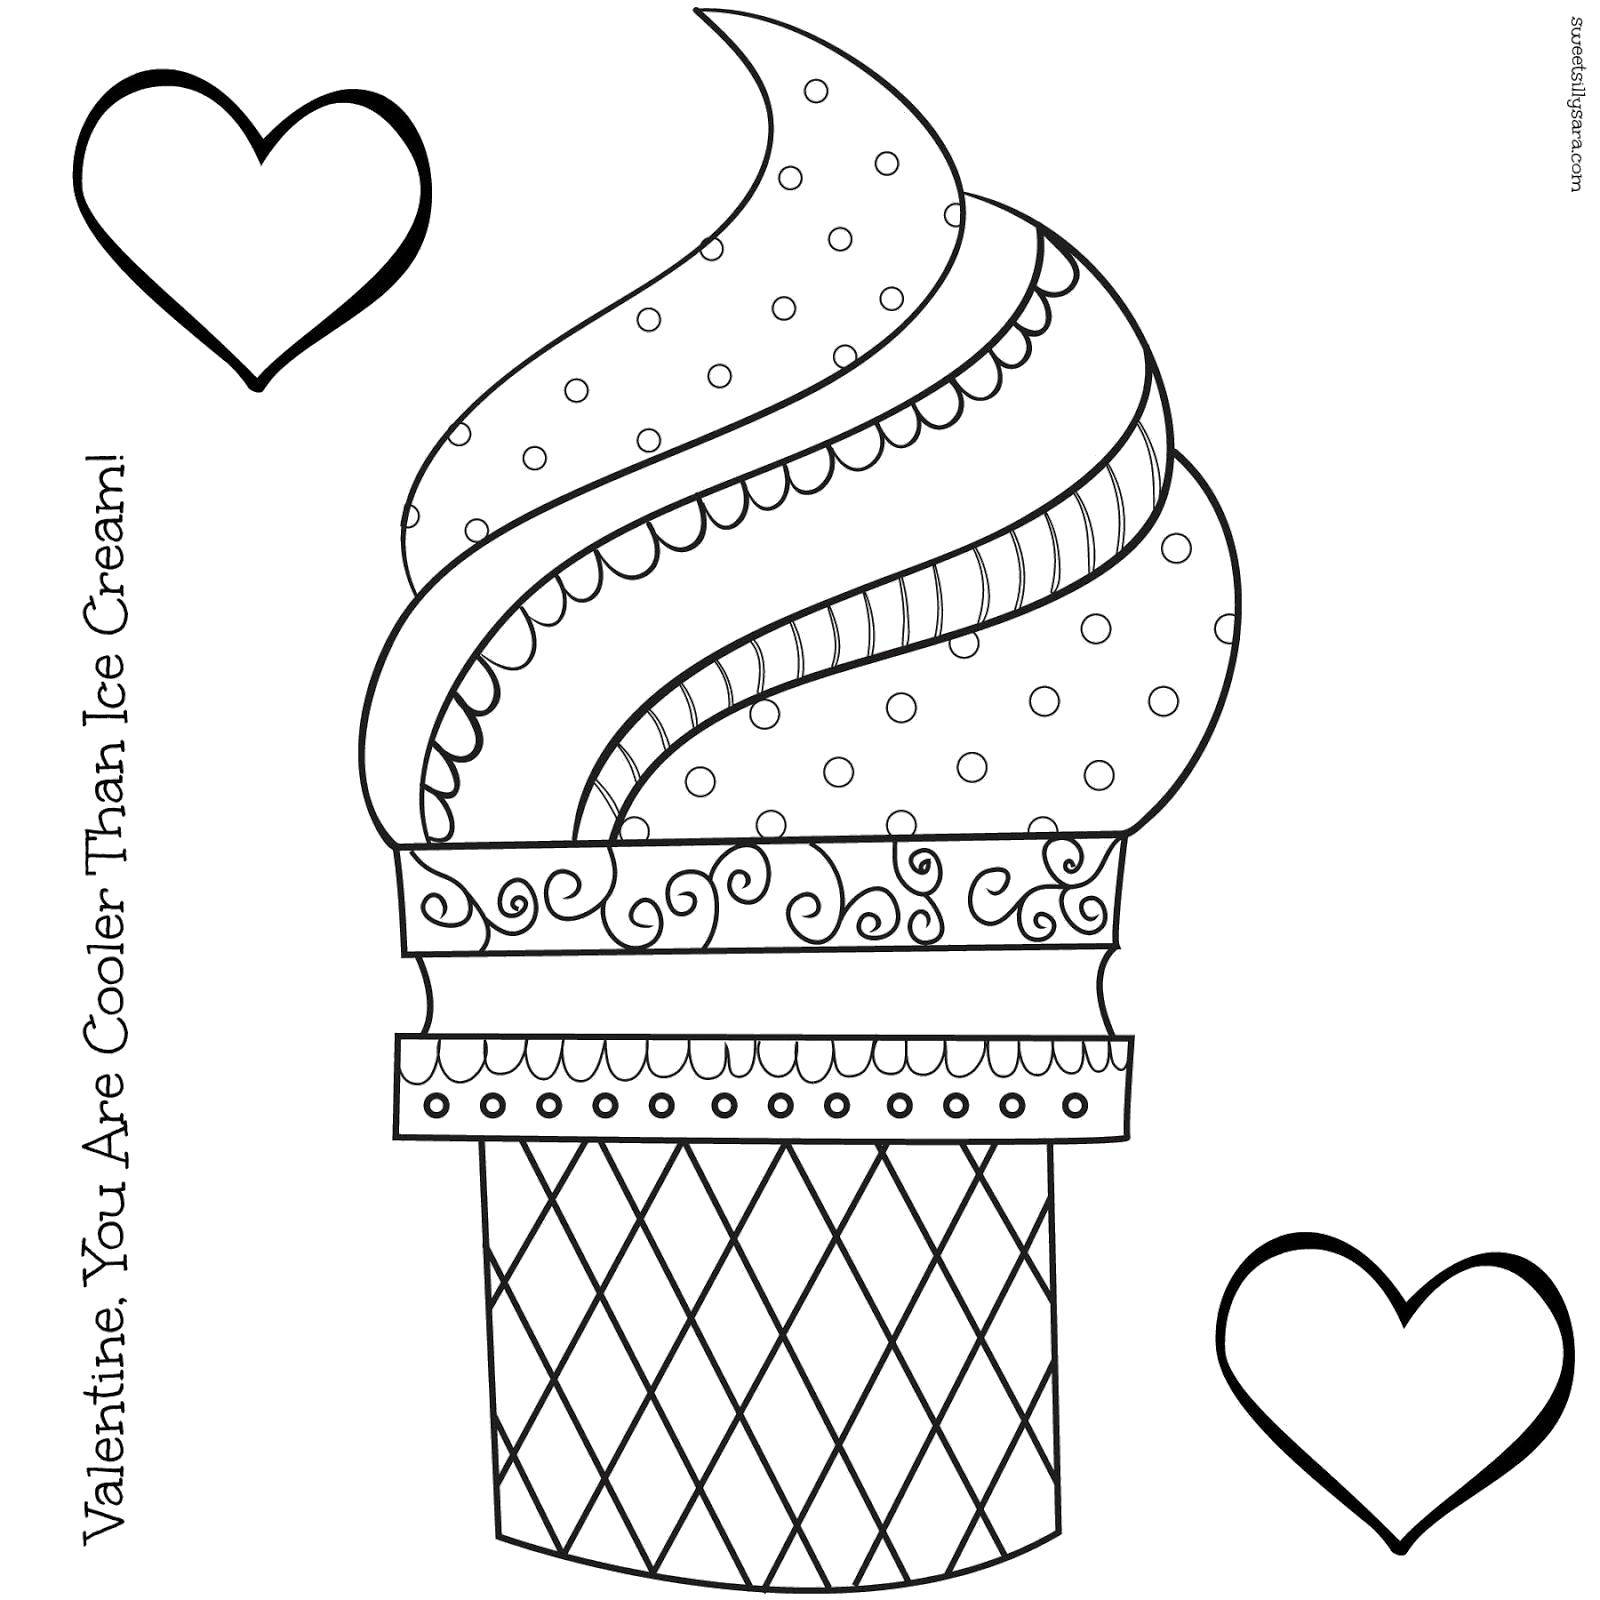 Coloring Ice cream cones and patterns. Category ice cream. Tags:  Ice cream, sweetness, children.